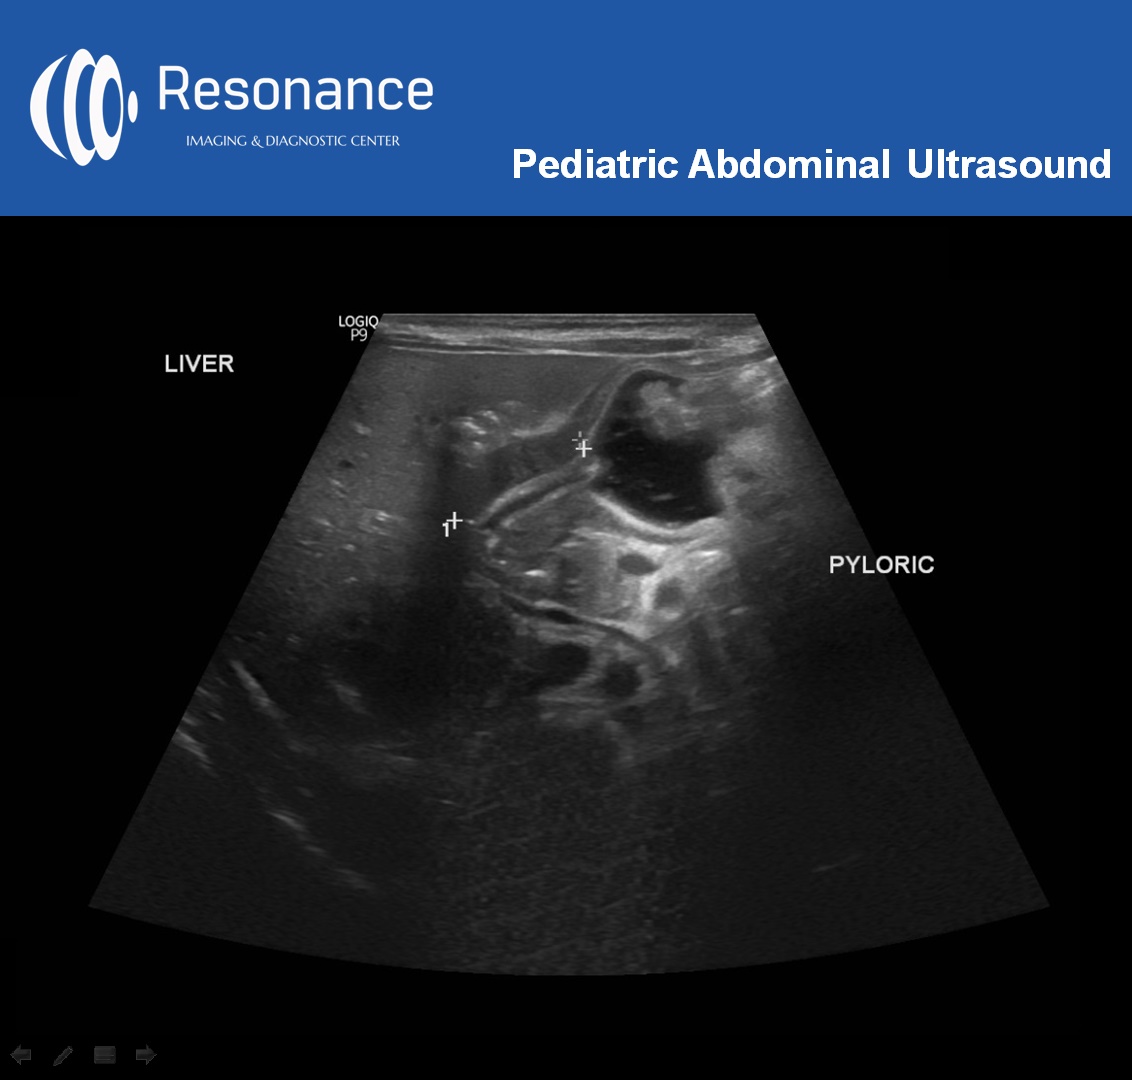 #pediatricabdominalultrasound is a #diagnosticimaging tool to scan the #abdominalorgans. It is a great #diagnostictool for #children because there is #noexposuretoradiation and there is usually no need for #sedation or #generalanesthesia. 

Read more: rb.gy/0vjknd